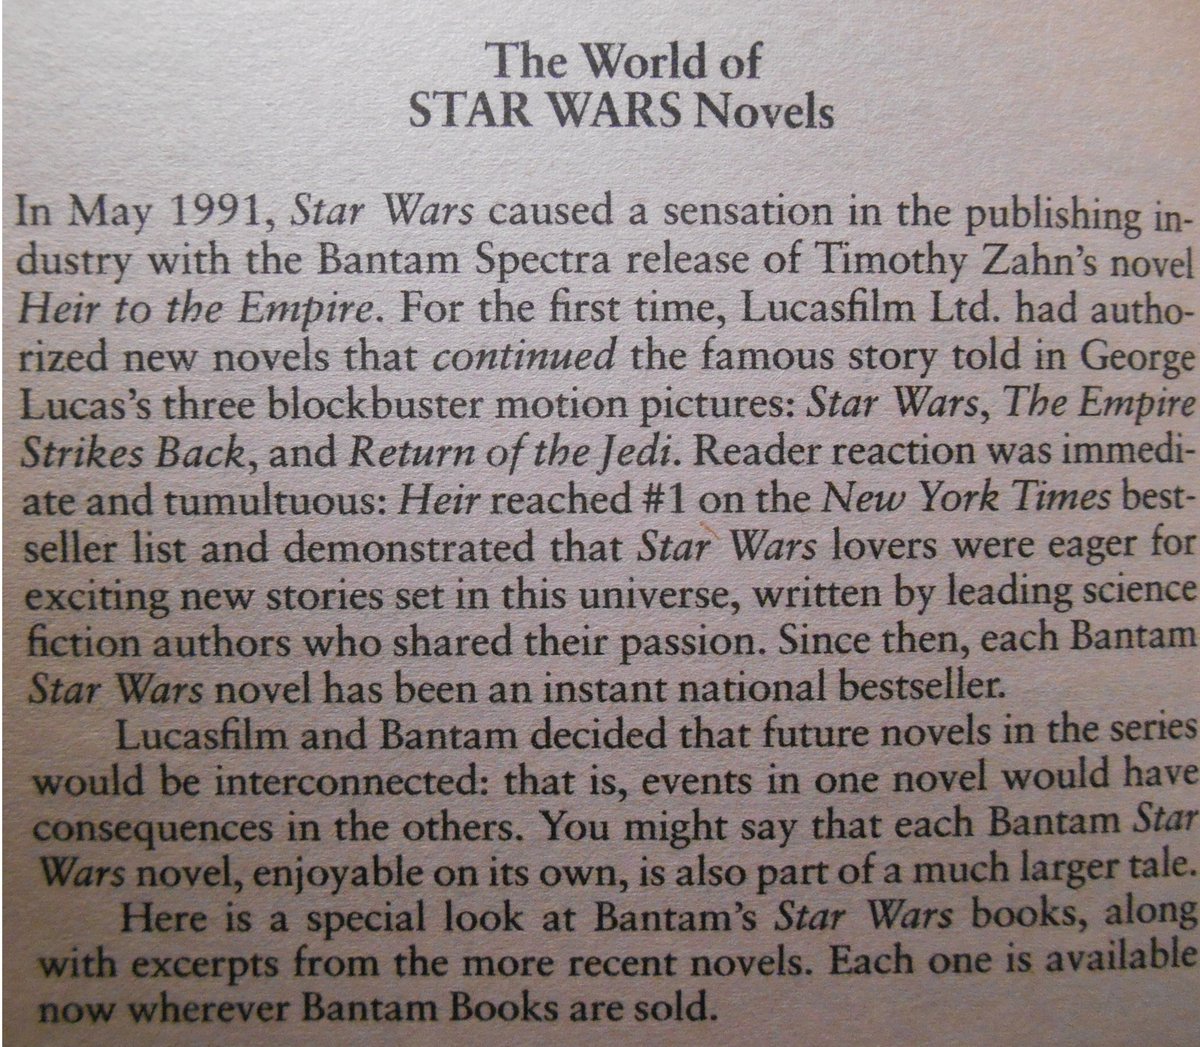 From the Vision of the Future paperback edition, 1999 (and other Bantam-era paperbacks) --